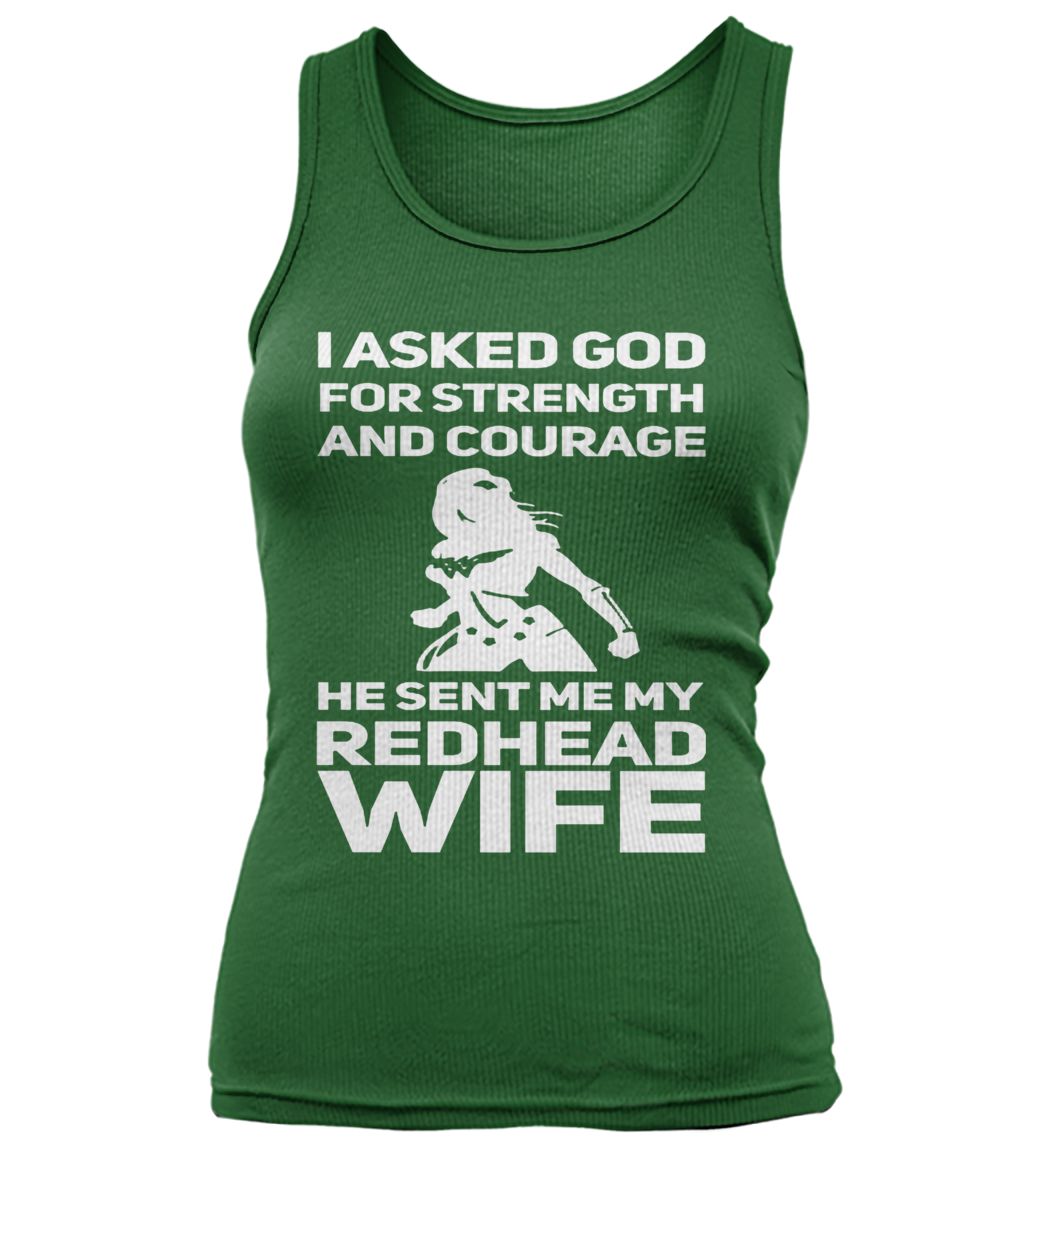 I asked god for strength and courage he sent my redhead wife women's tank top